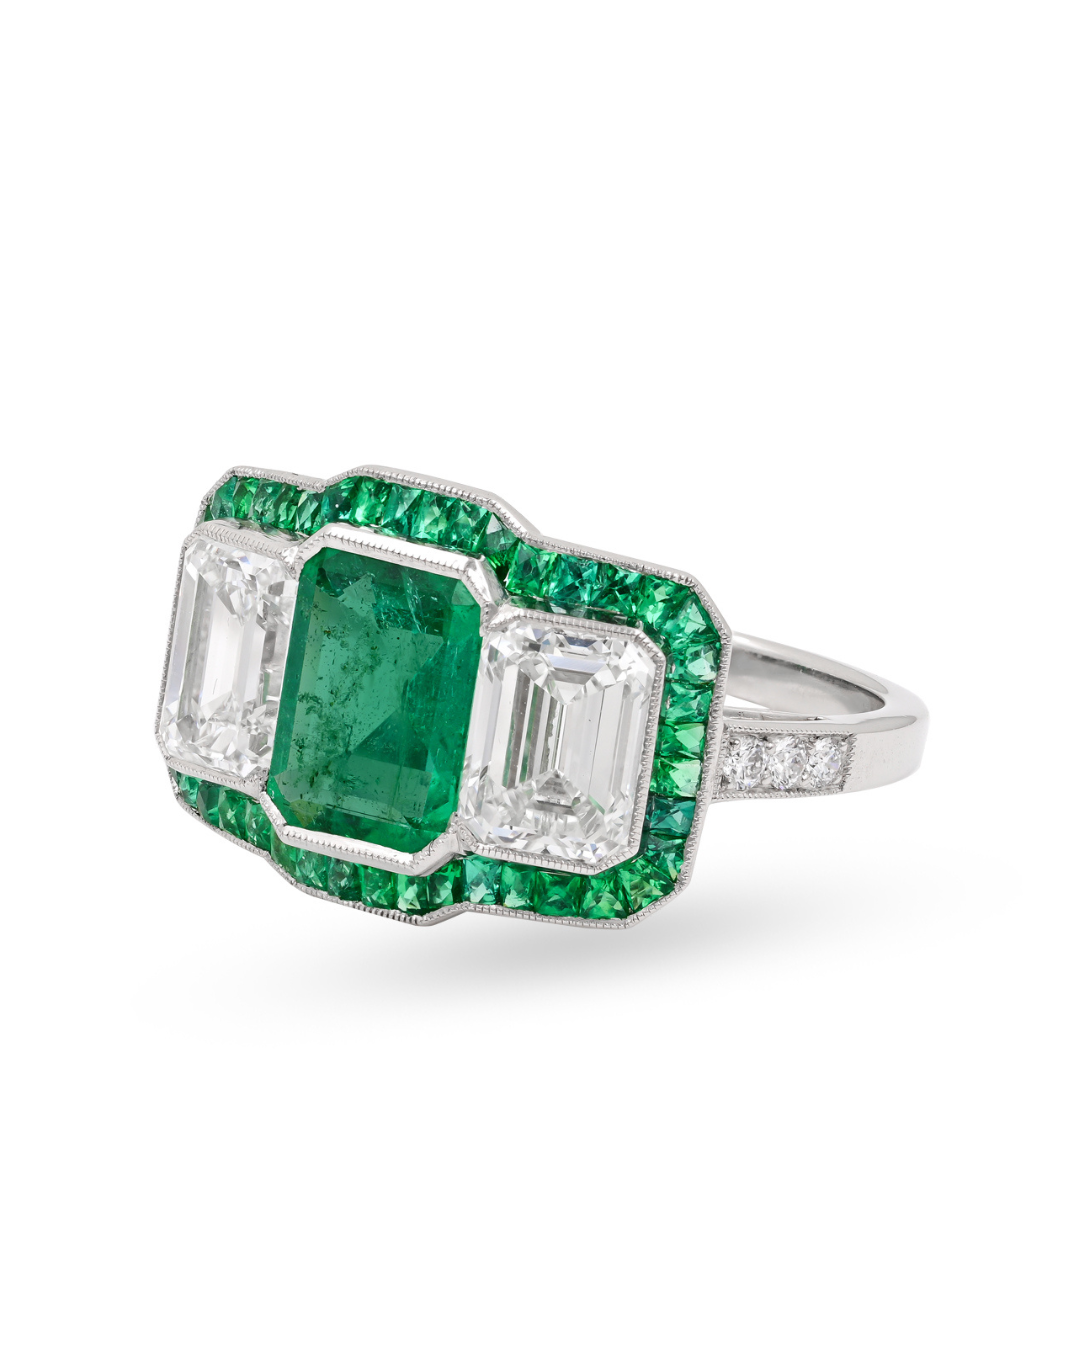 Sophia D. Three Stone Ring with Emerald Center and Diamond Side Stones, Surrounded by French Cut Emeralds